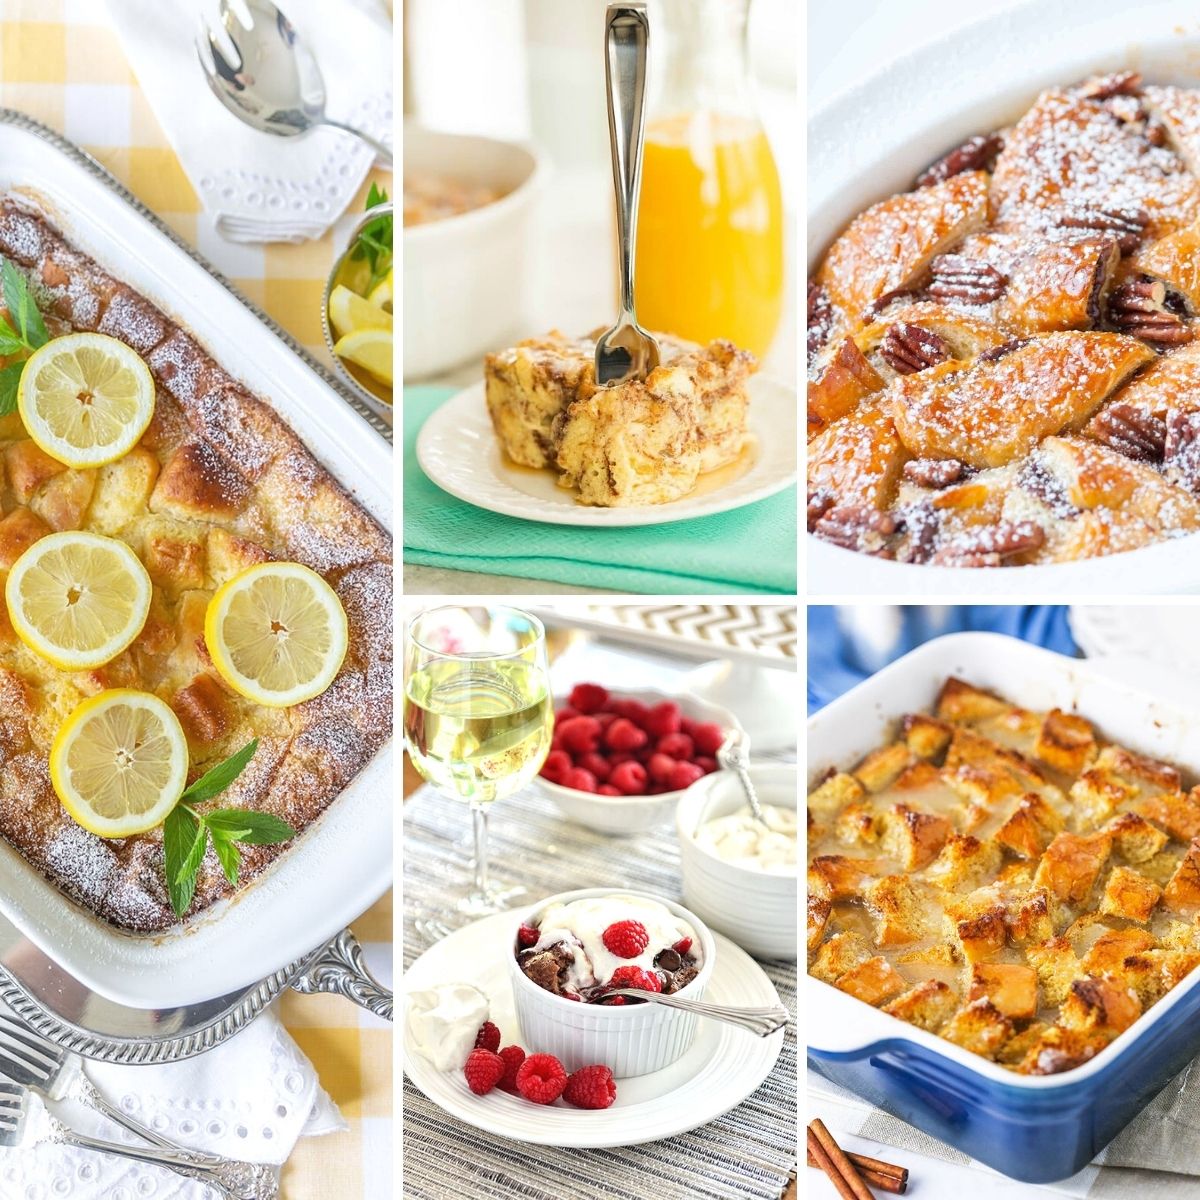 A photo collage shows a variety of bread pudding recipes.